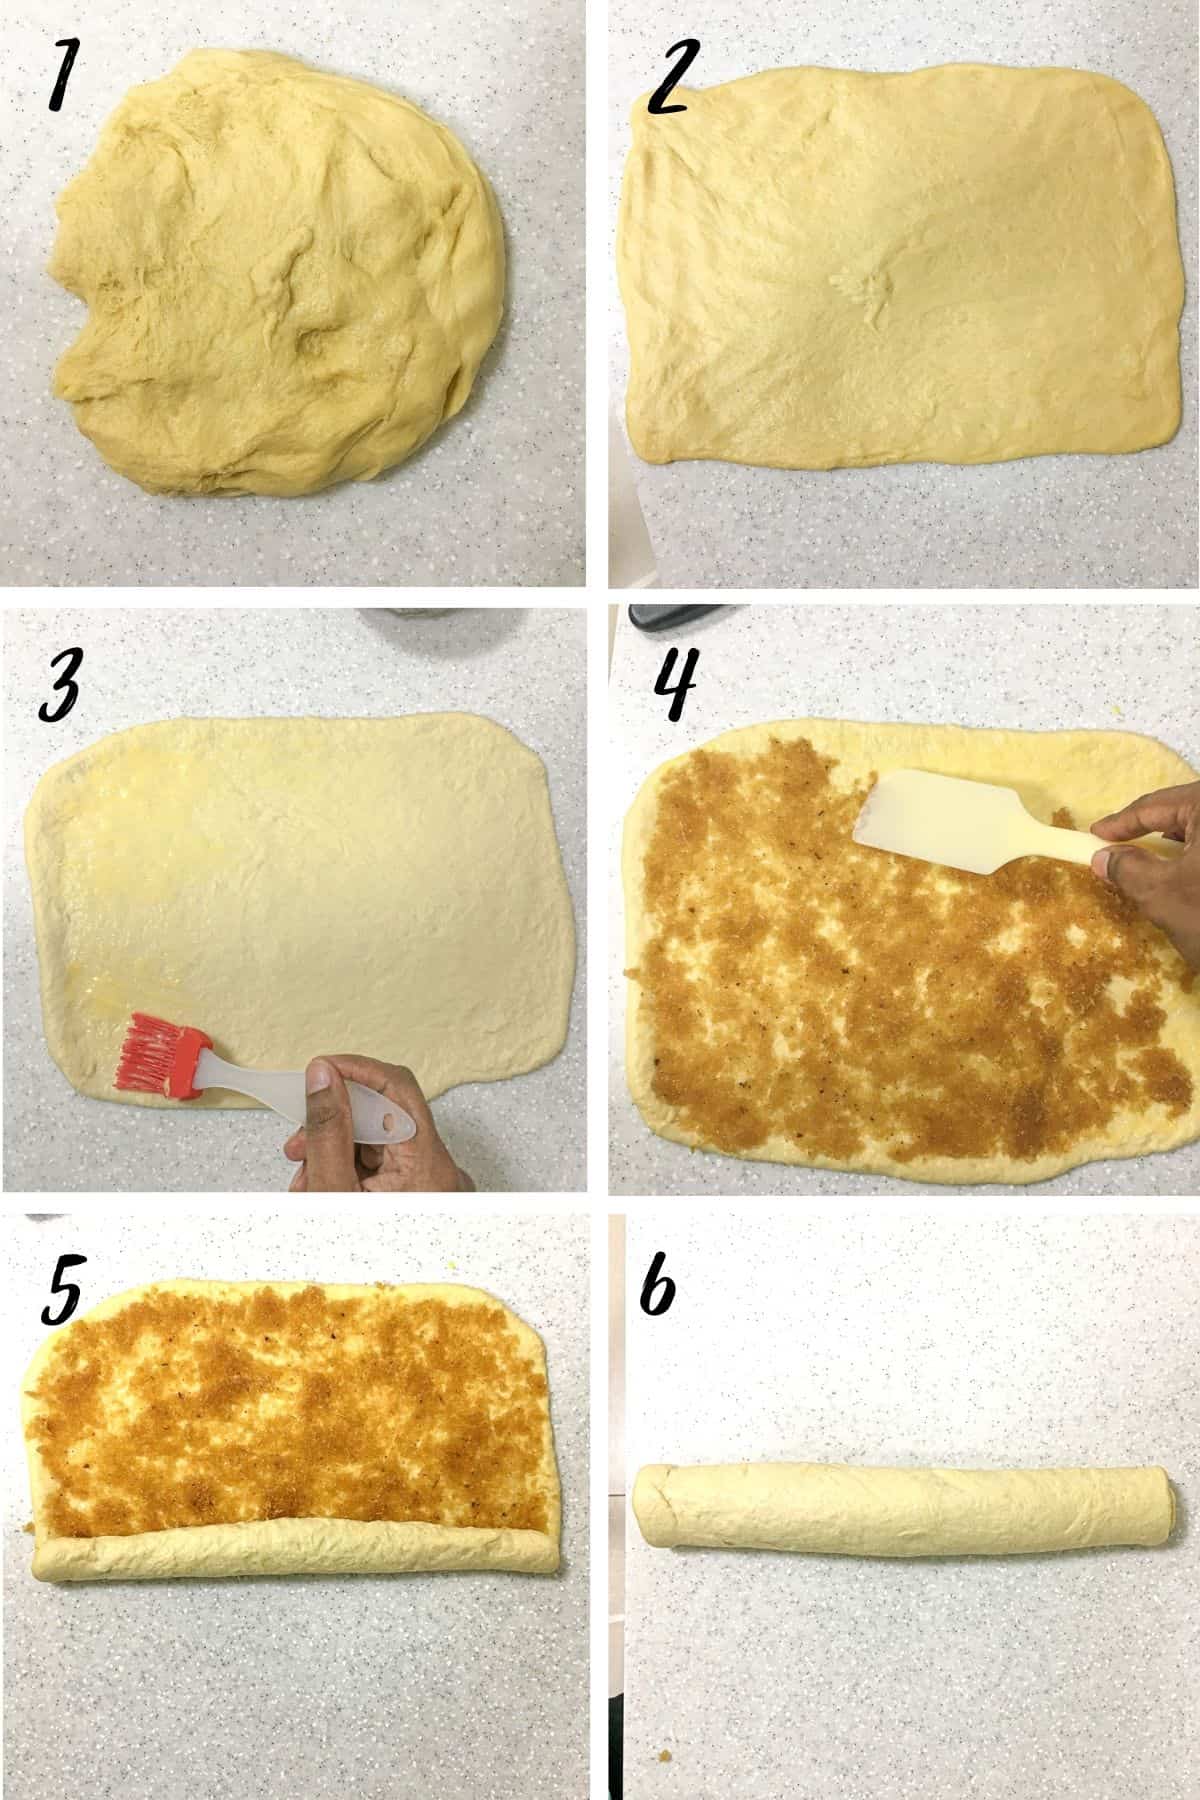 A poster of 6 images showing how to roll dough.